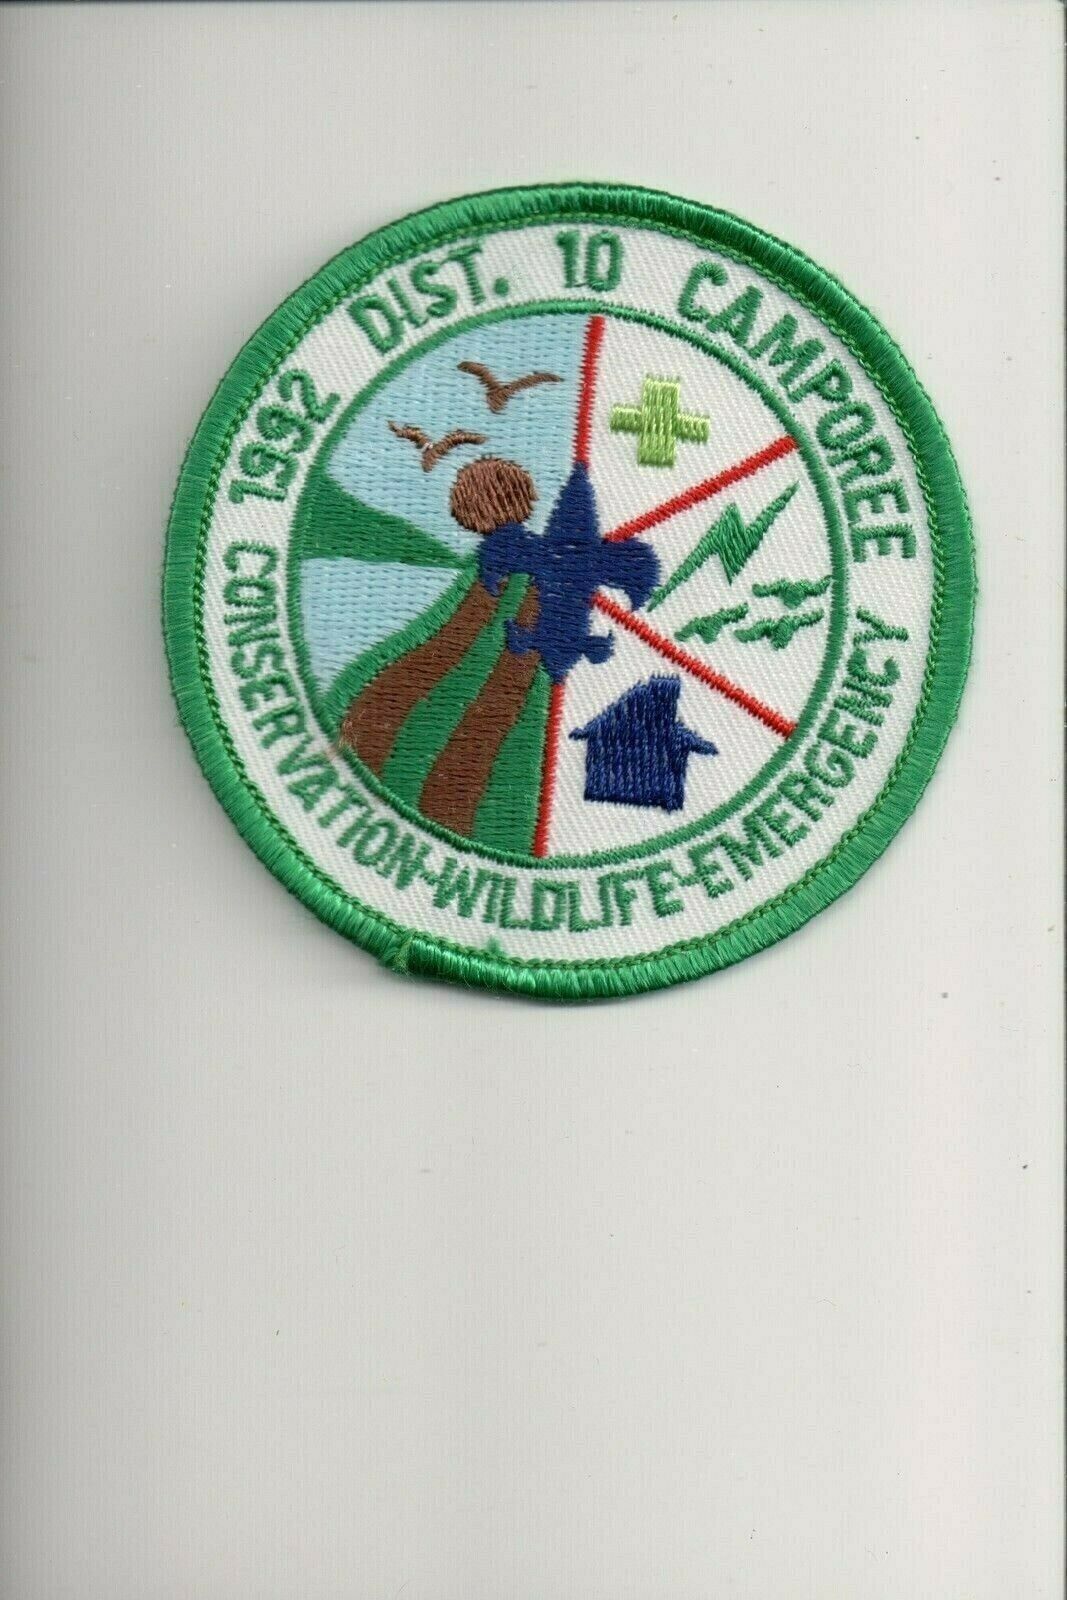 1992 District 10 Camporee Conservation Wildlife Emergency patch